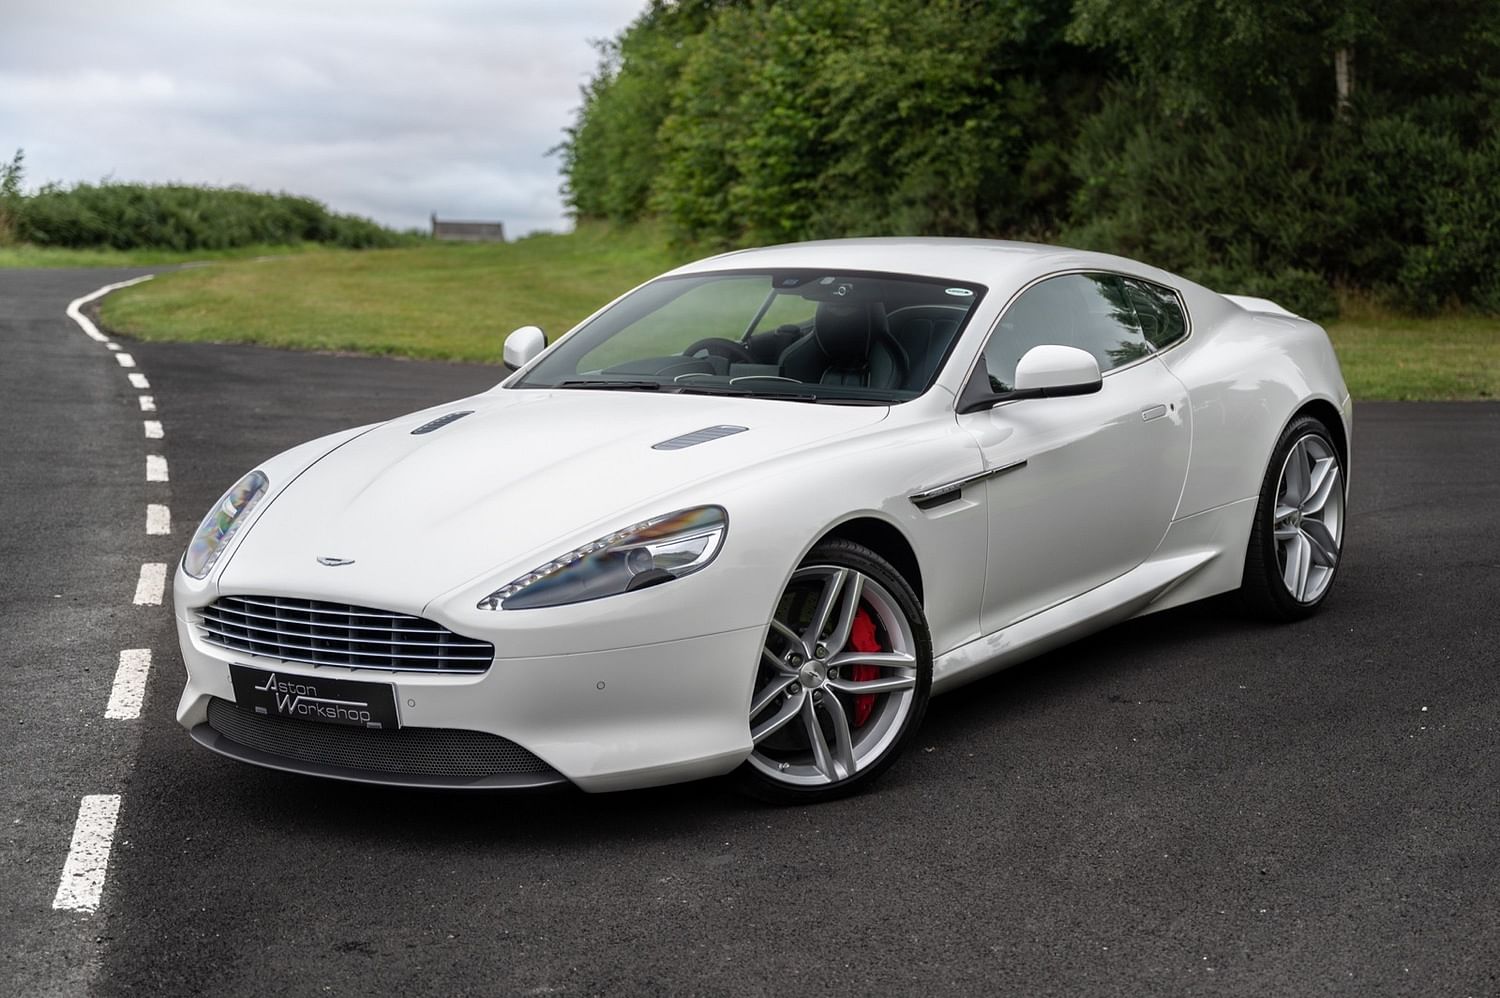 2013 Aston Martin DB9 Price, Review, Pictures and Cars for Sale | CARHP